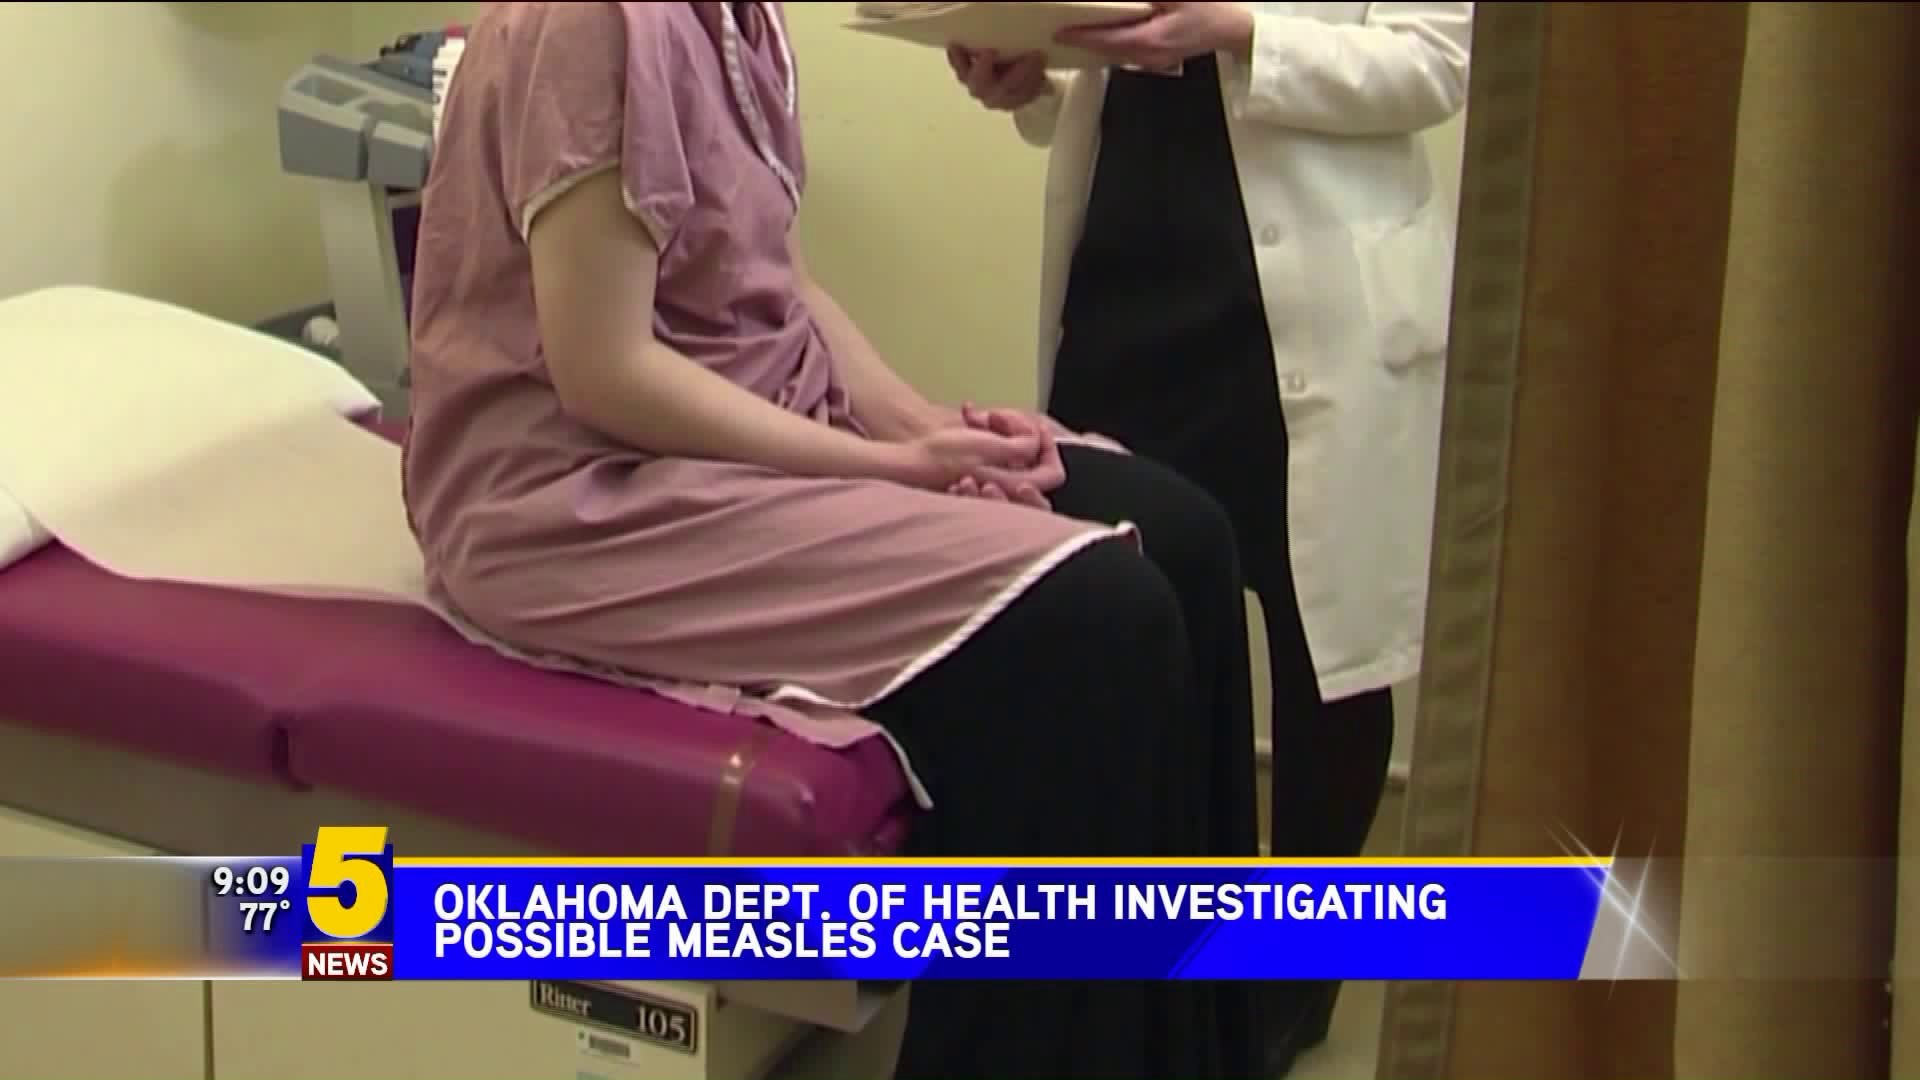 Oklahoma Dept. Of Health Investigating Possible Measles Case